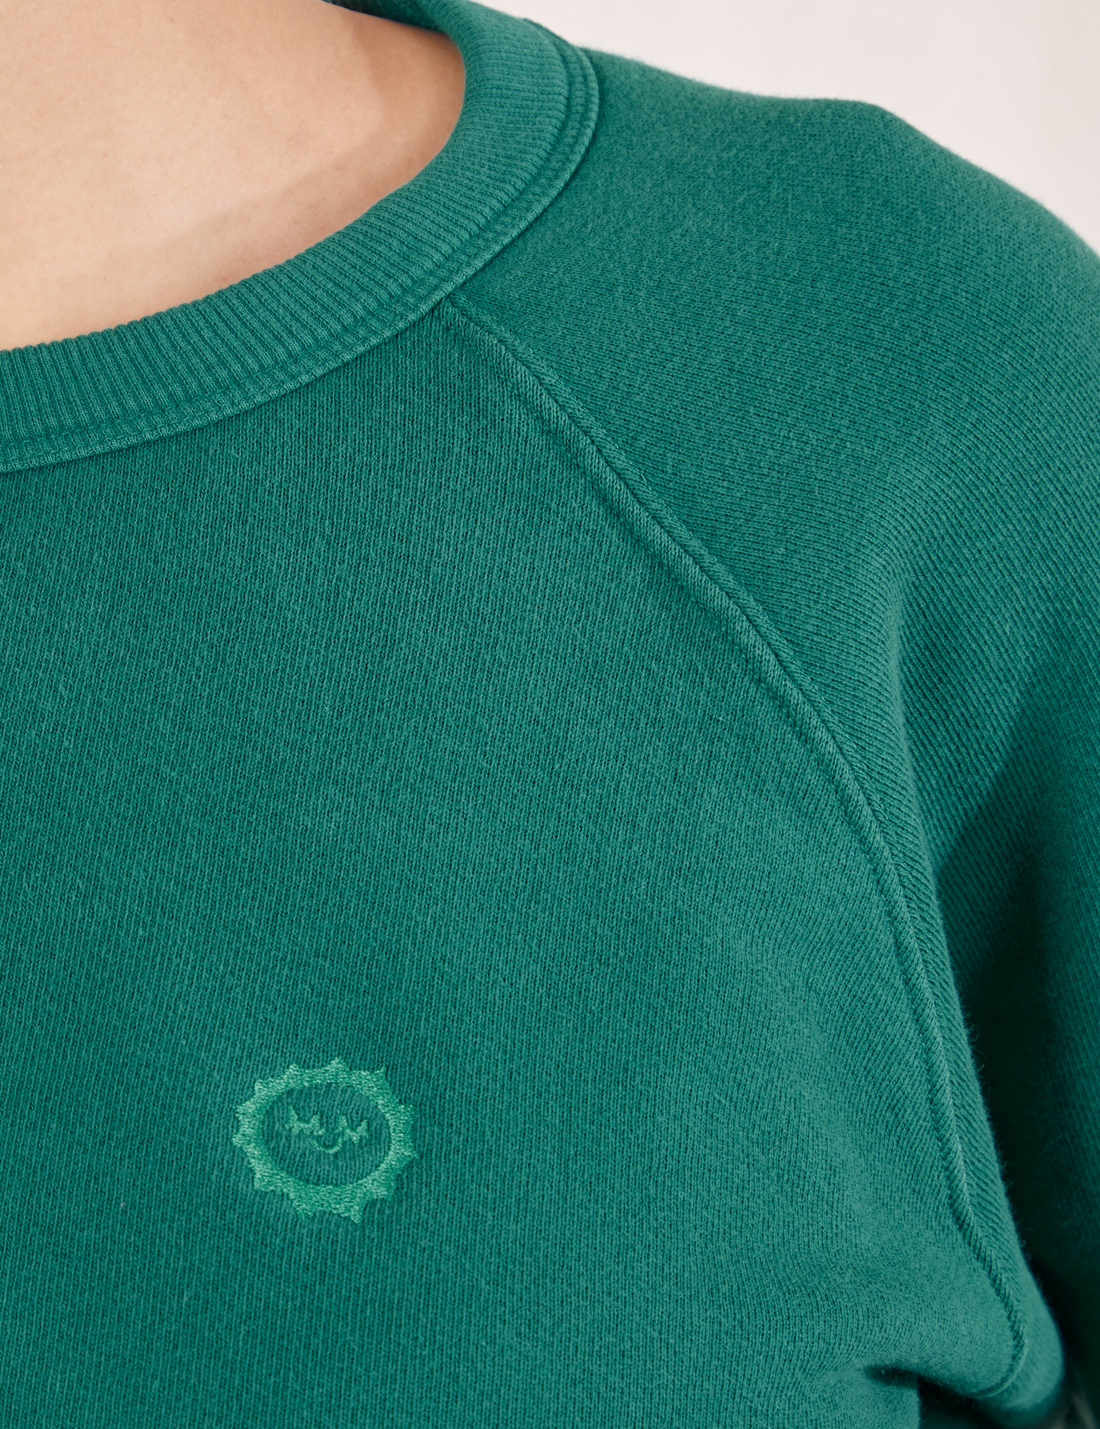 Heavyweight Crew in Hunter Green front close up on Tiara. Embroidered sun baby logo in green.